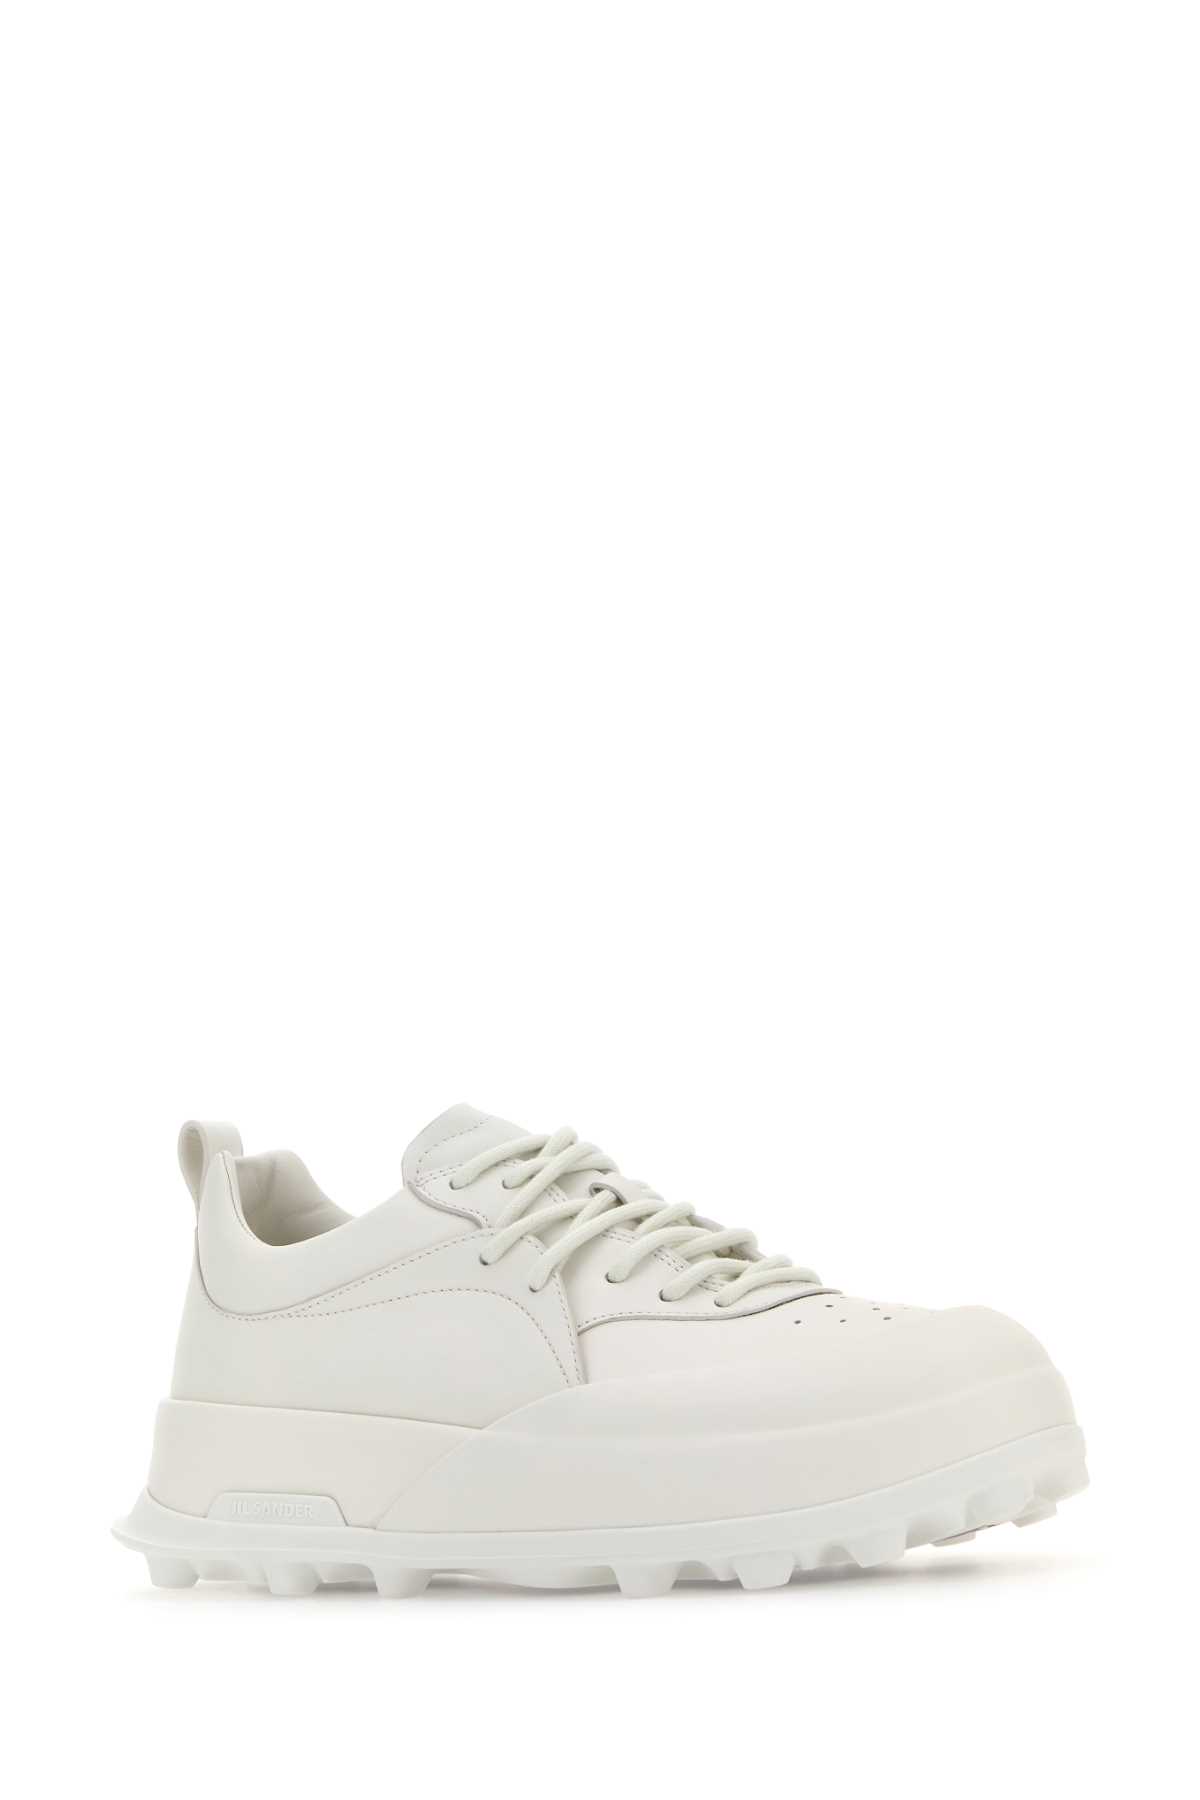 Jil Sander White Leather And Rubber Orb Trainers In 102